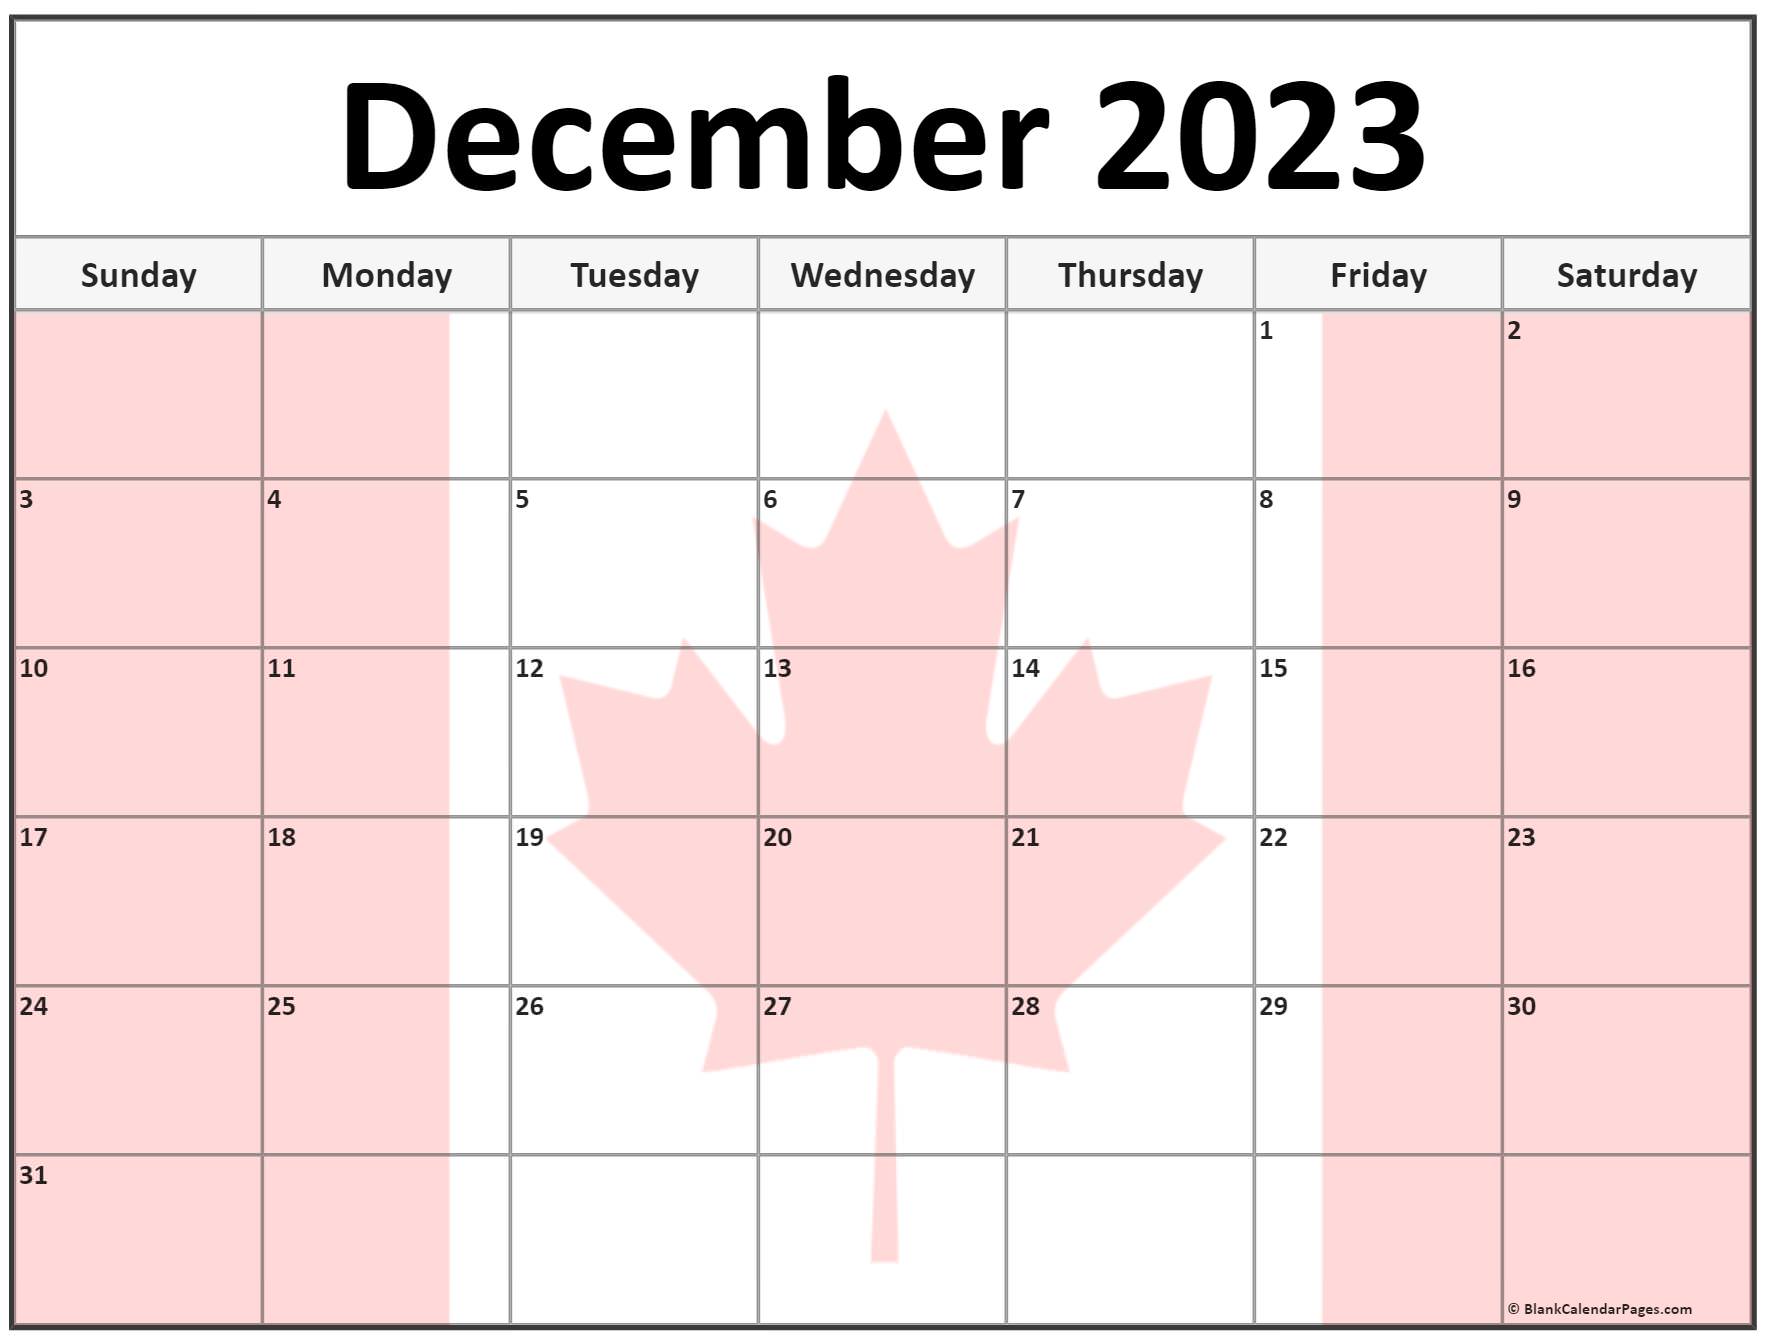 collection-of-december-2023-photo-calendars-with-image-filters